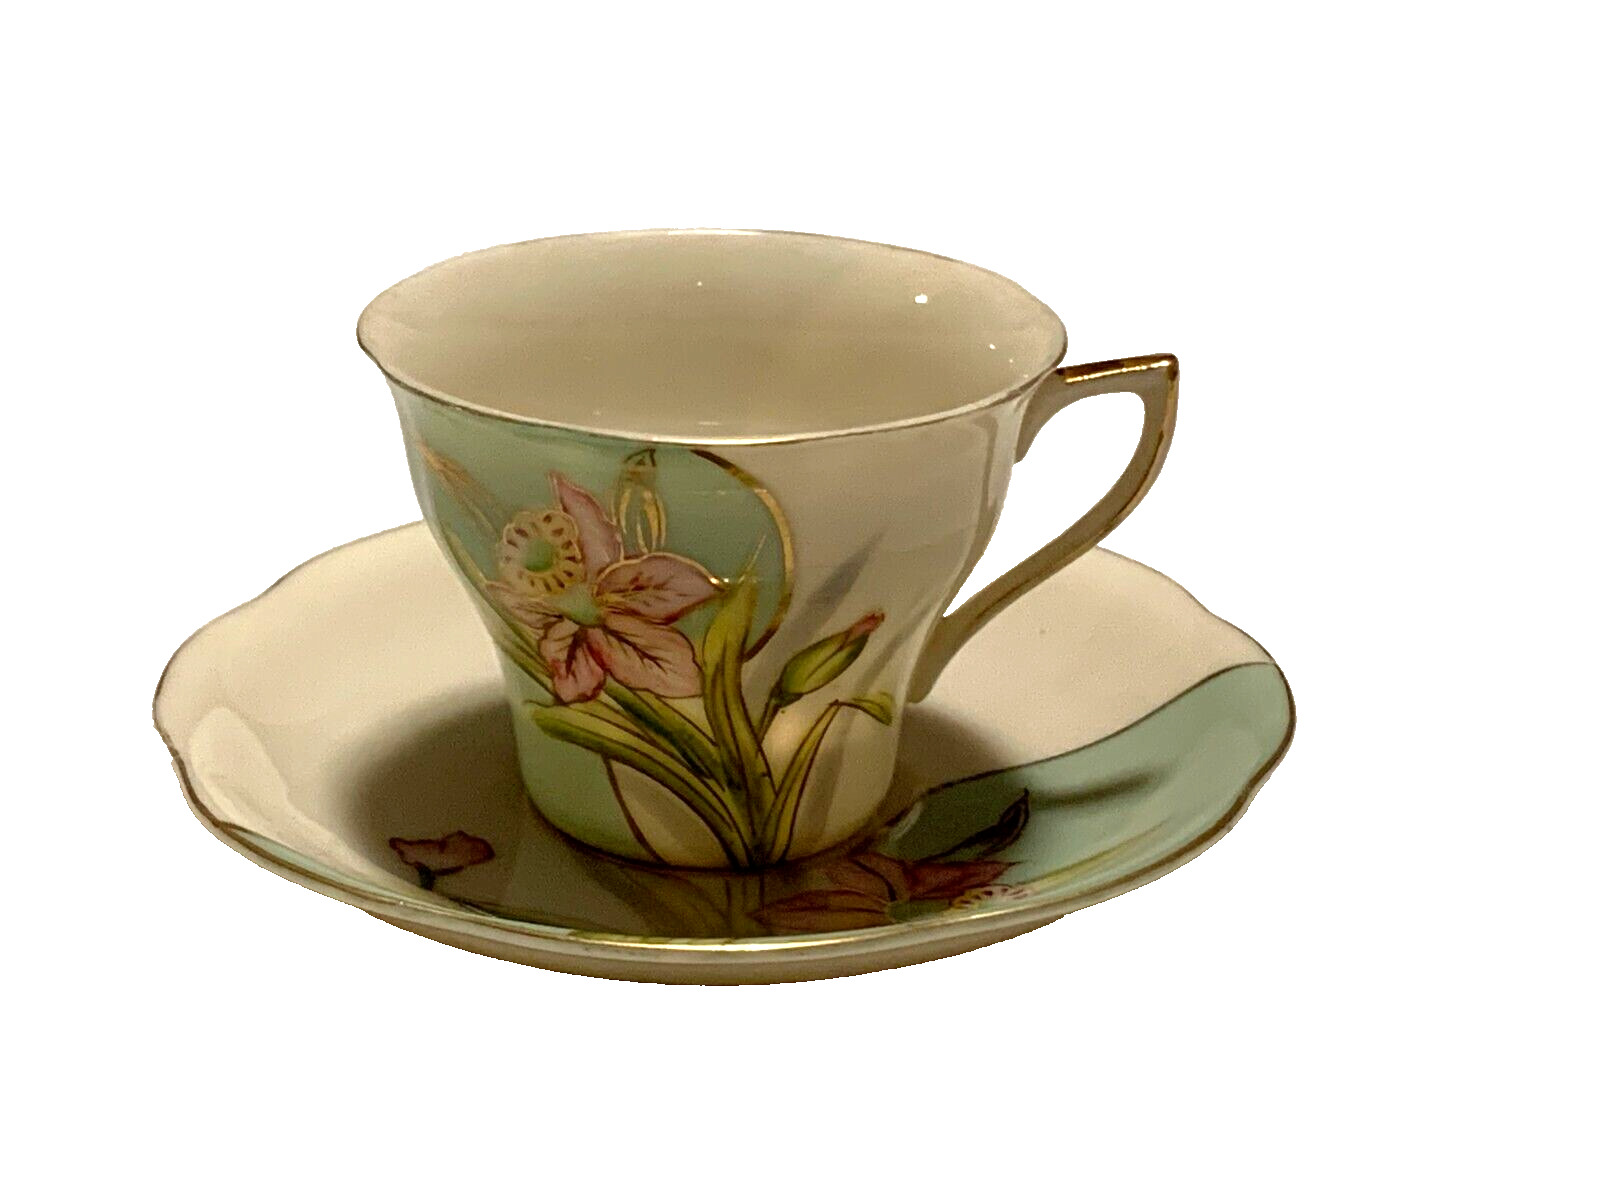 Vintage Ucagco China Tea Cup and Saucer OCCUPIED JAPAN Hand Painted